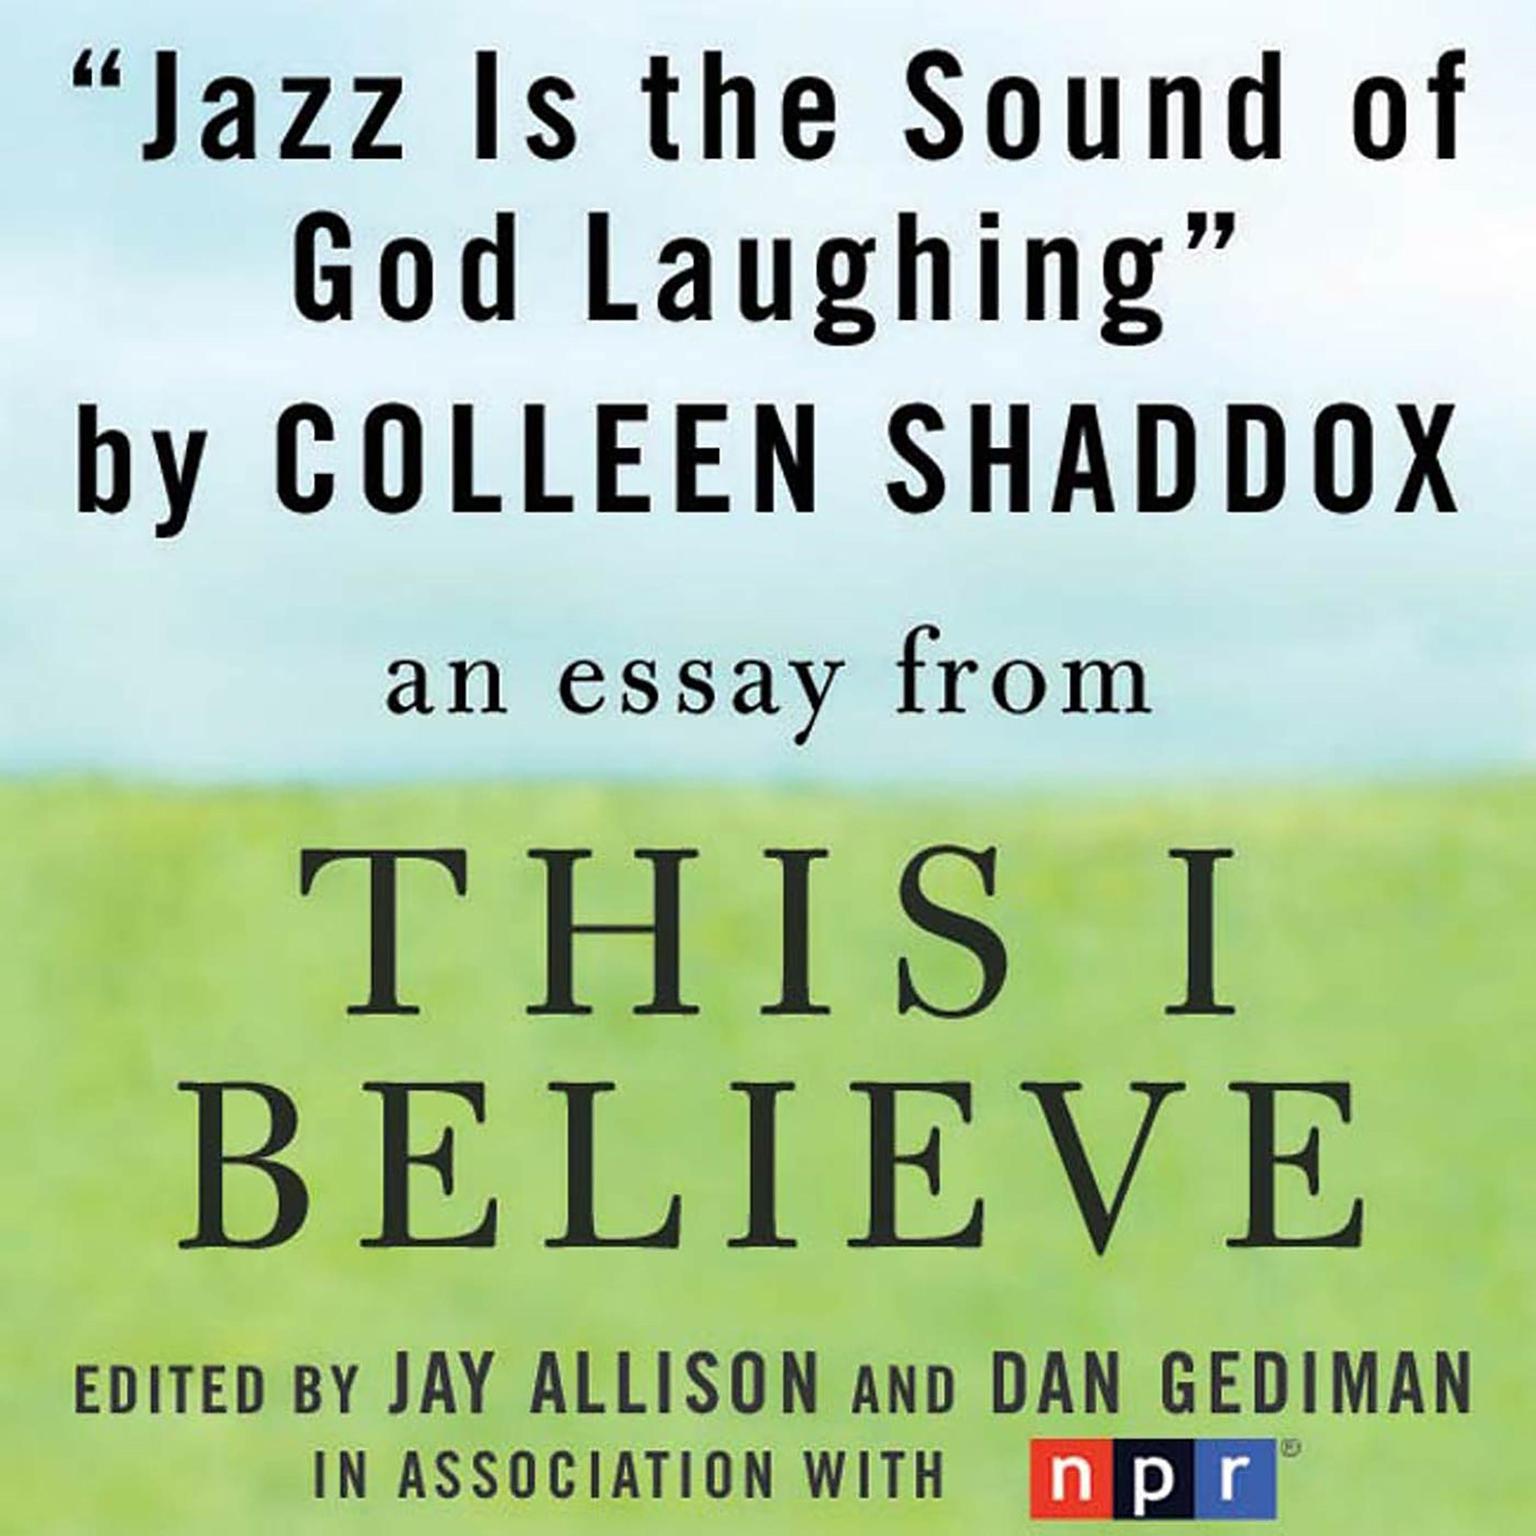 Jazz is the Sound of God Laughing: A This I Believe Essay Audiobook, by Colleen Shaddox